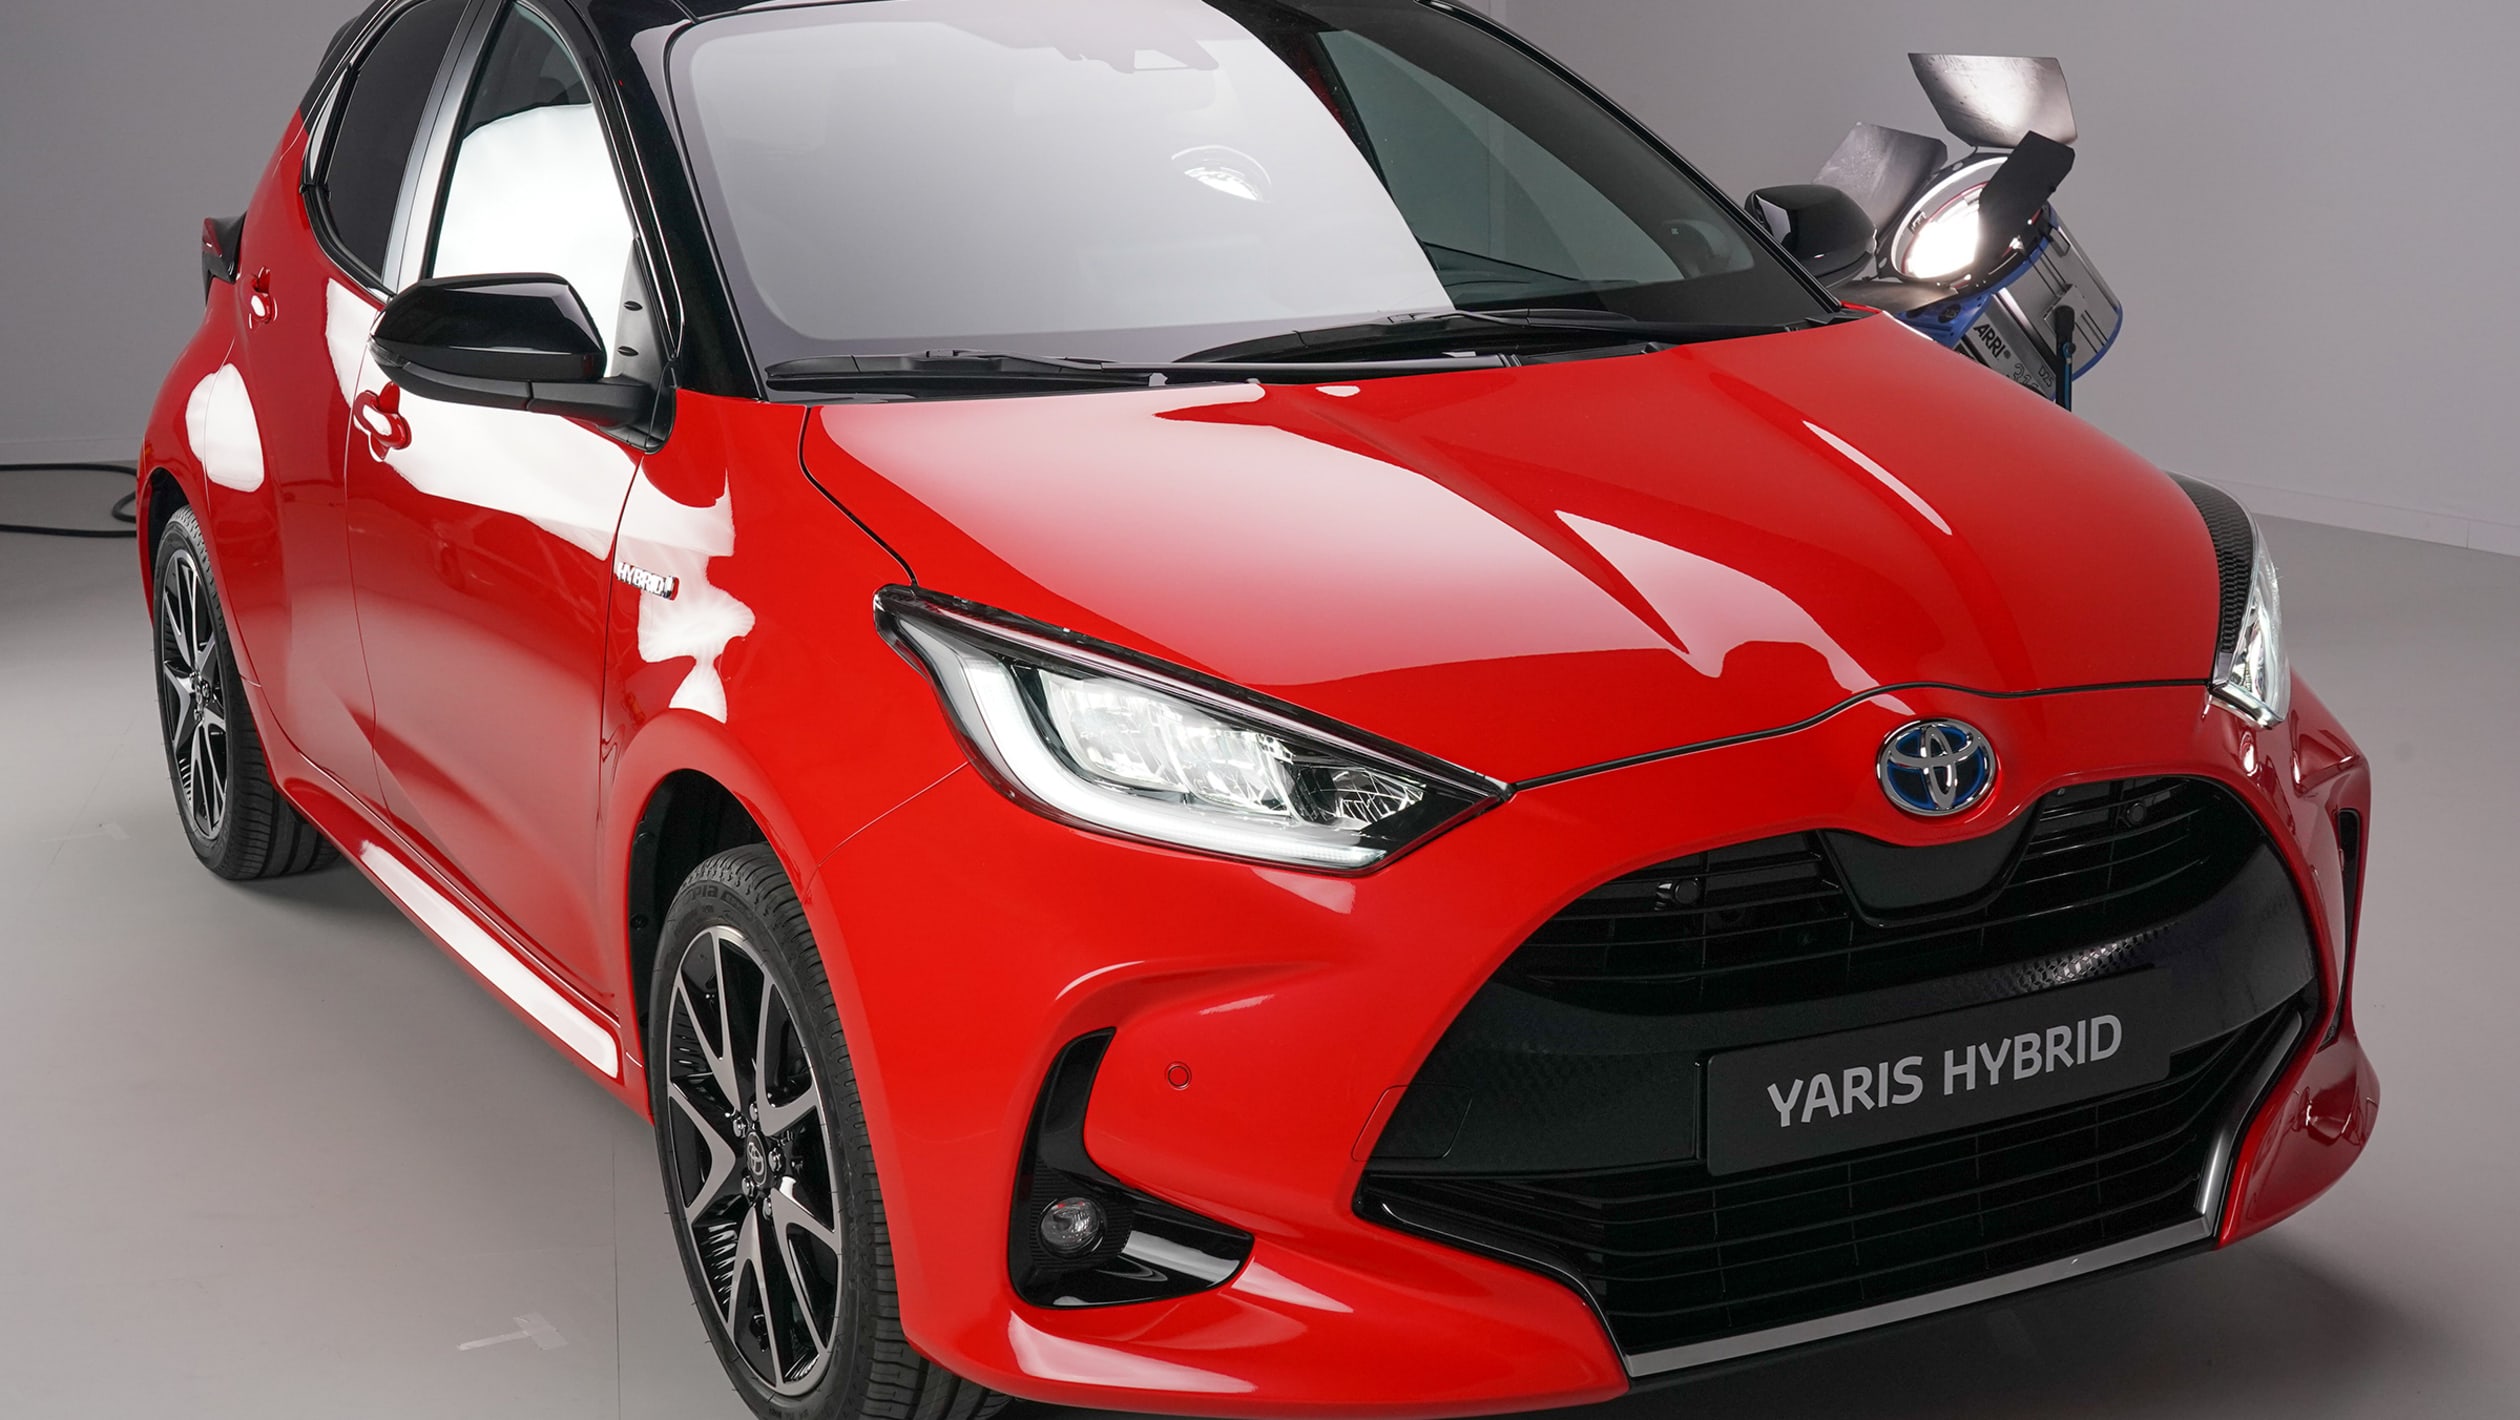 New 2020 Toyota Yaris Supermini Revealed With All New Hybrid Tech